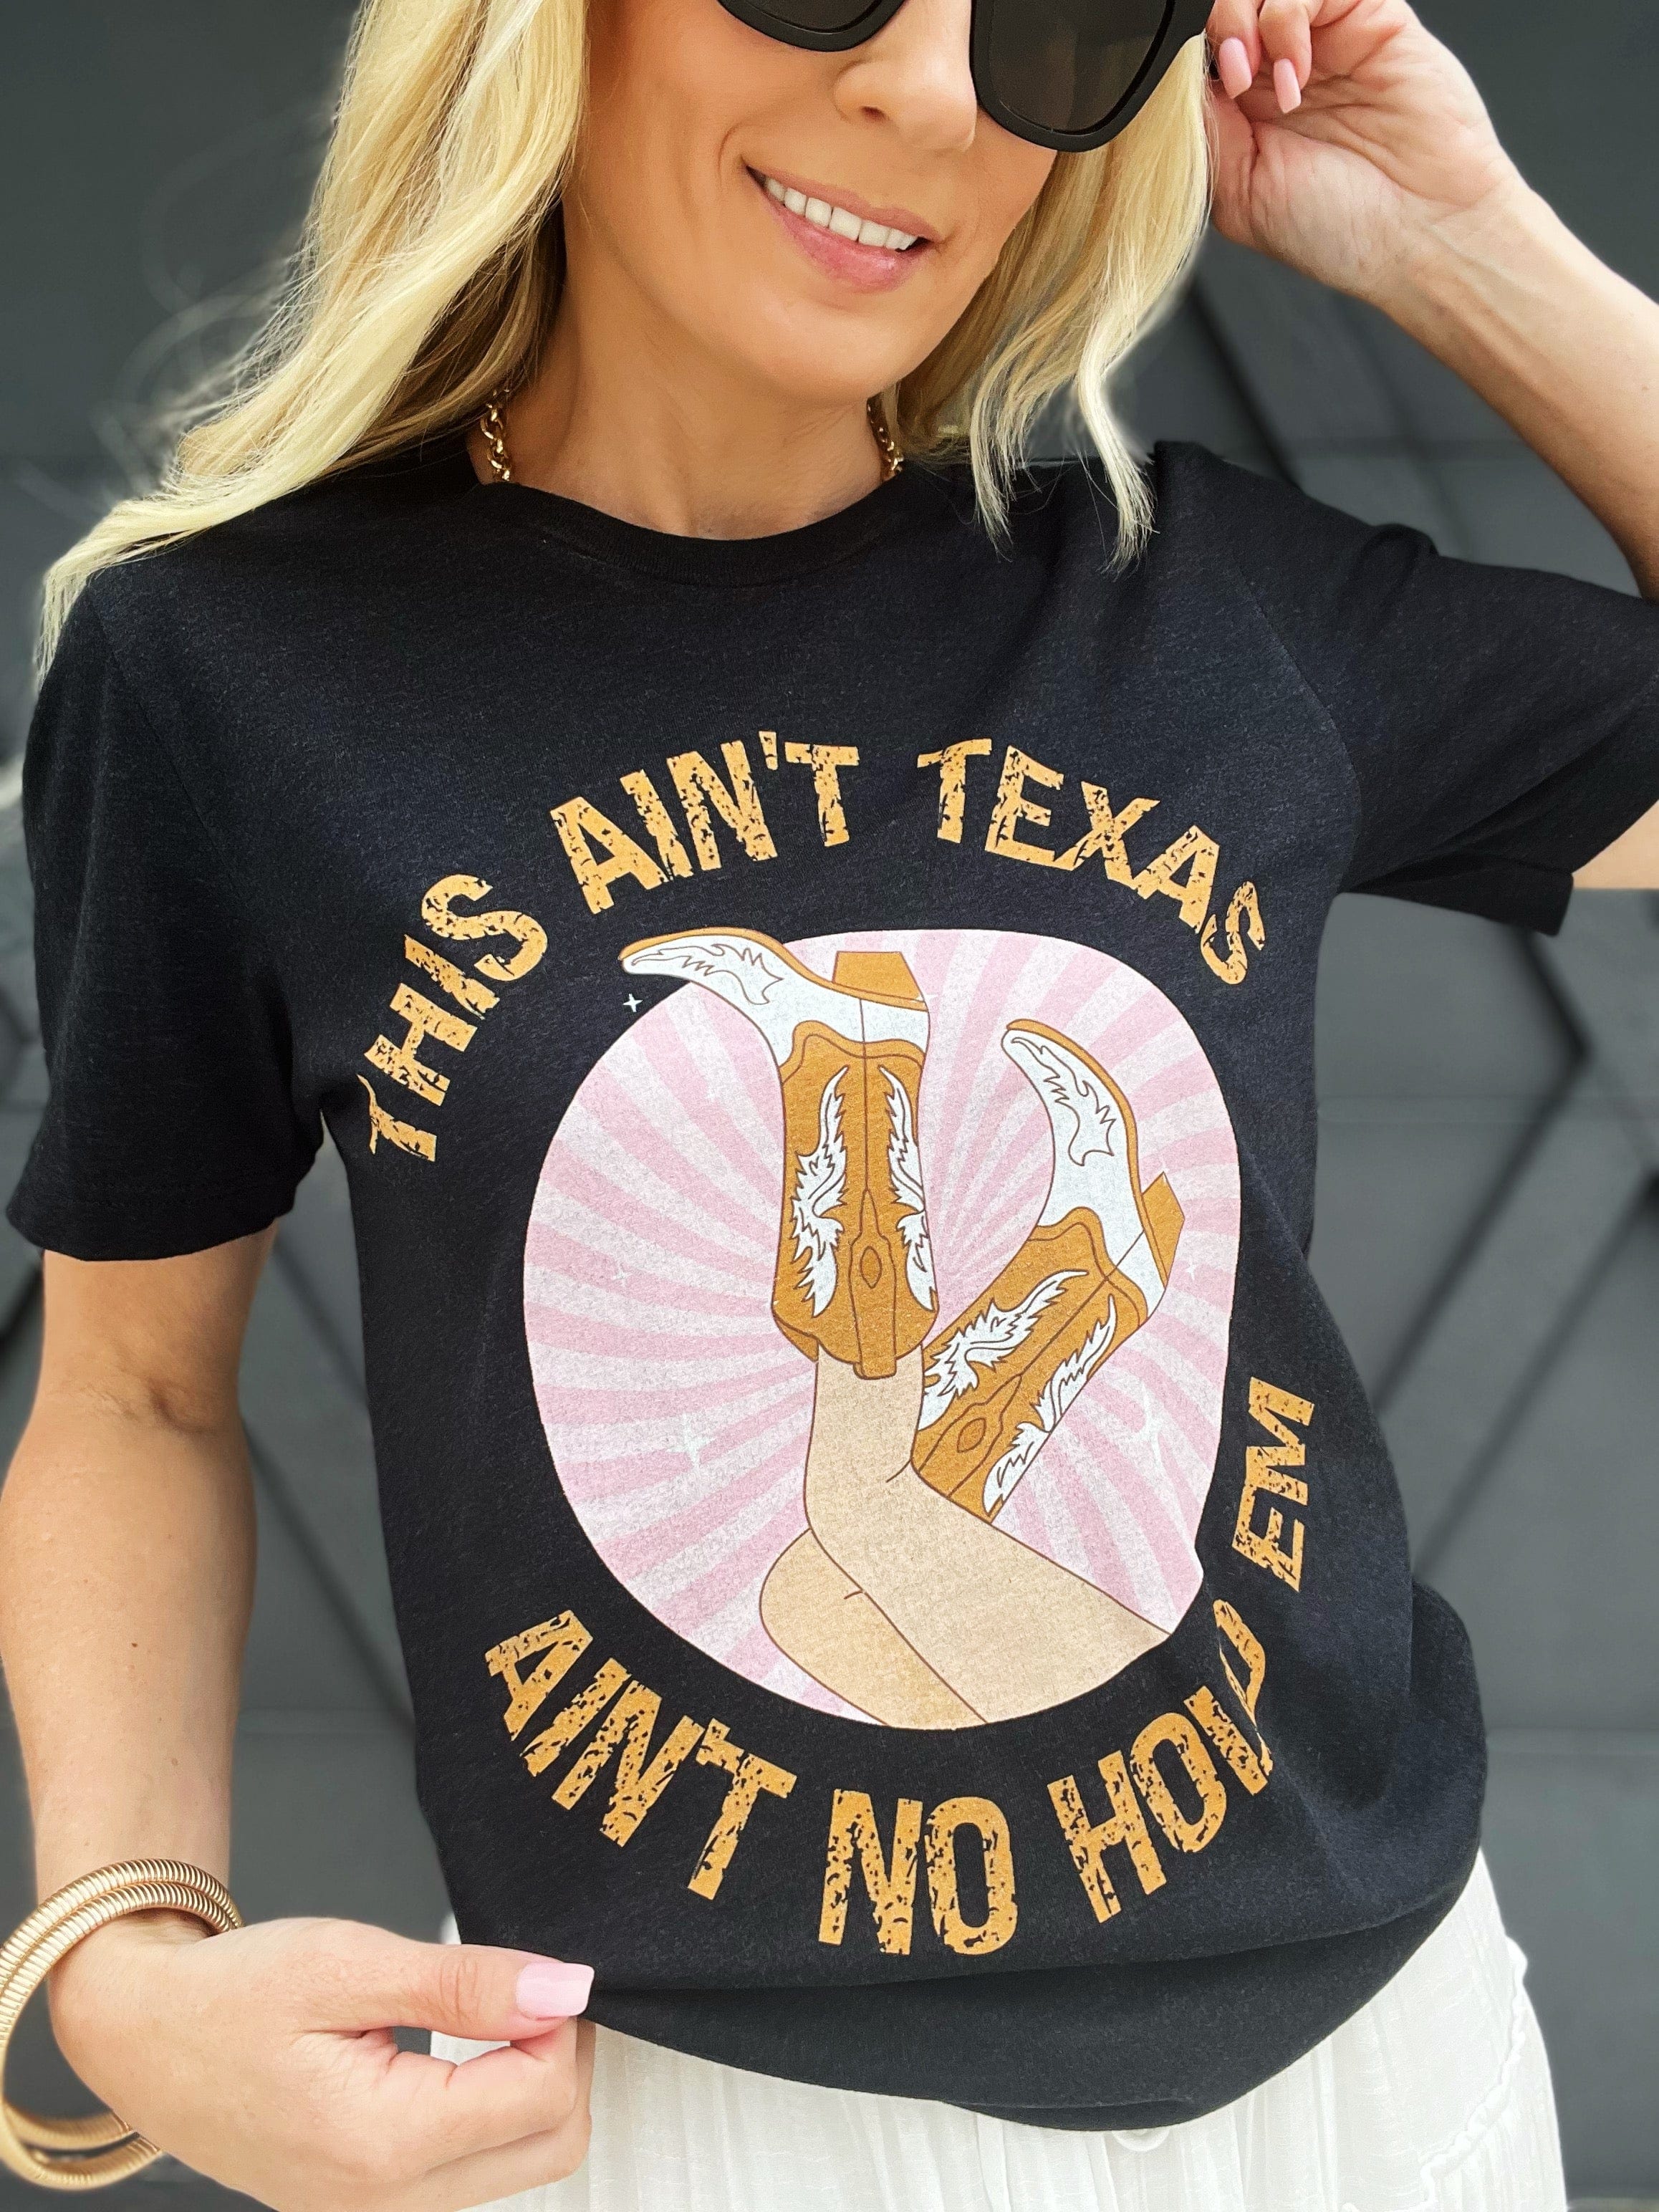 Kissed Apparel Tops - Tees This Ain't Texas Graphic Tee In Black